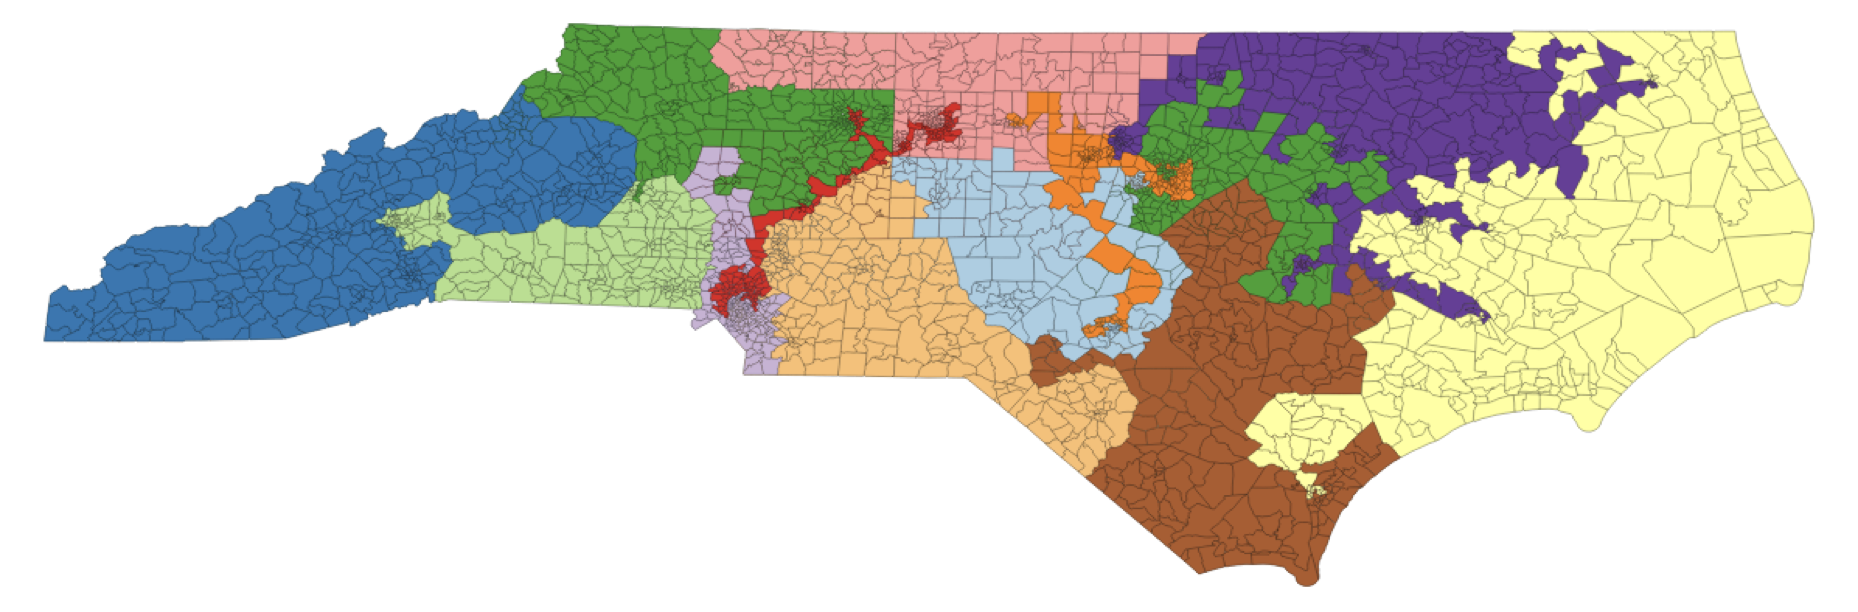 Image for "A Virtual ICERM Public Lecture: Quantifying and Understanding Gerrymandering - How a quest to understand his state's political geography led a mathematician to court"